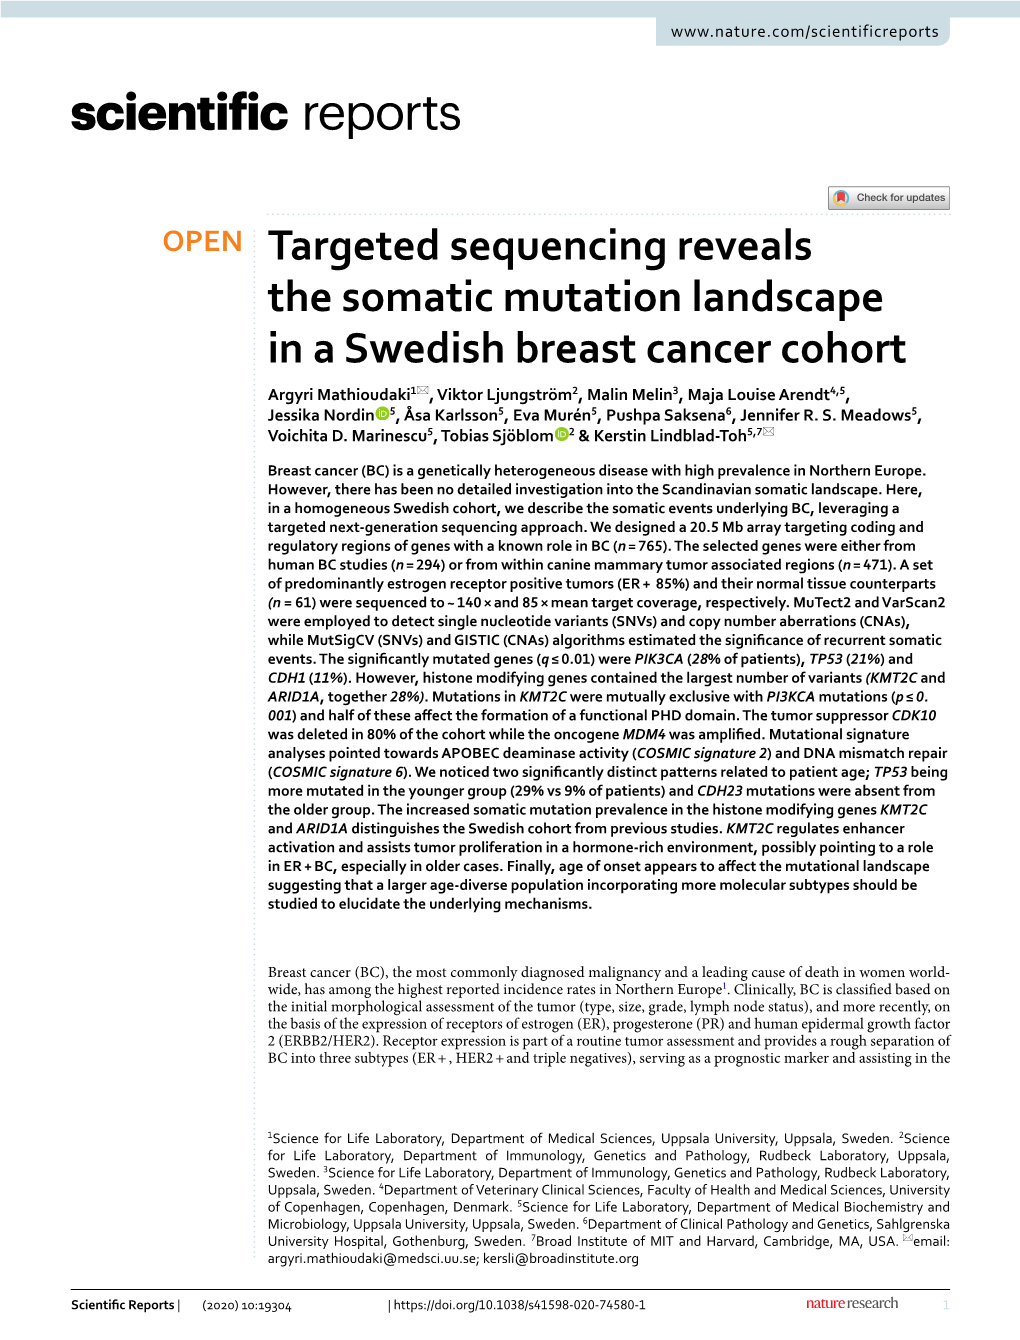 Targeted Sequencing Reveals the Somatic Mutation Landscape in a Swedish Breast Cancer Cohort